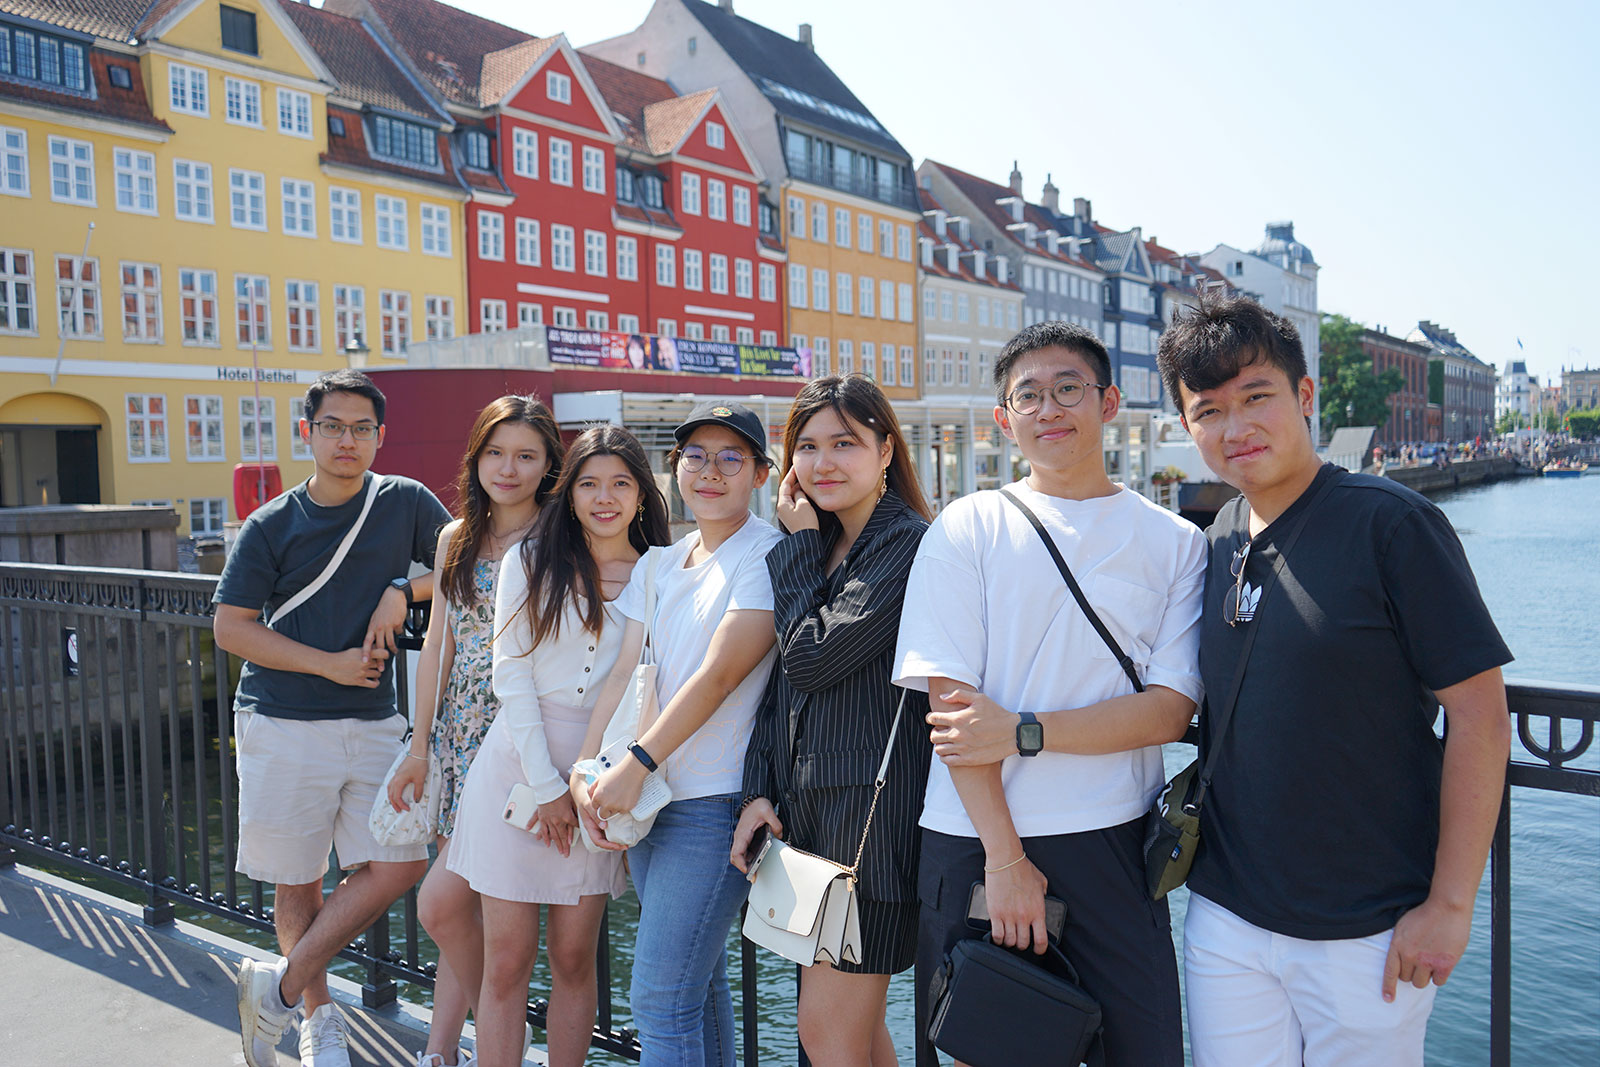 Benny (2nd from the right) and his fellow schoolmates at CityU tour around Copenhagen